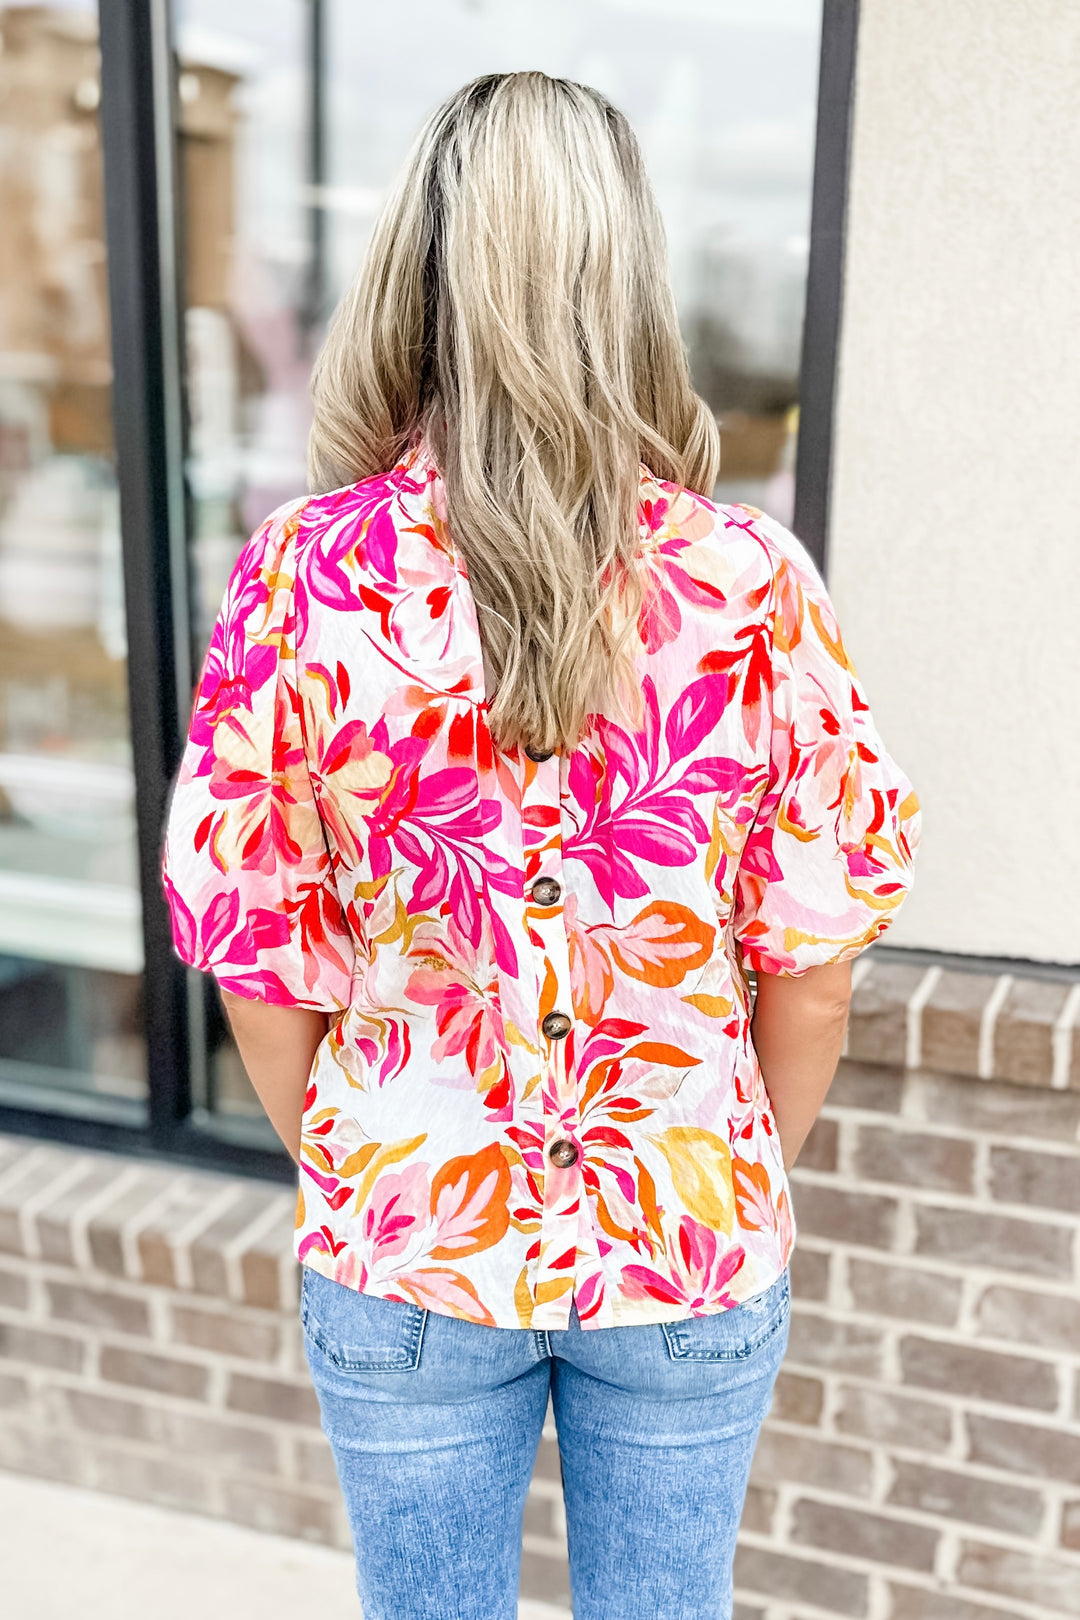 PINK & YELLOW FLORAL TOP